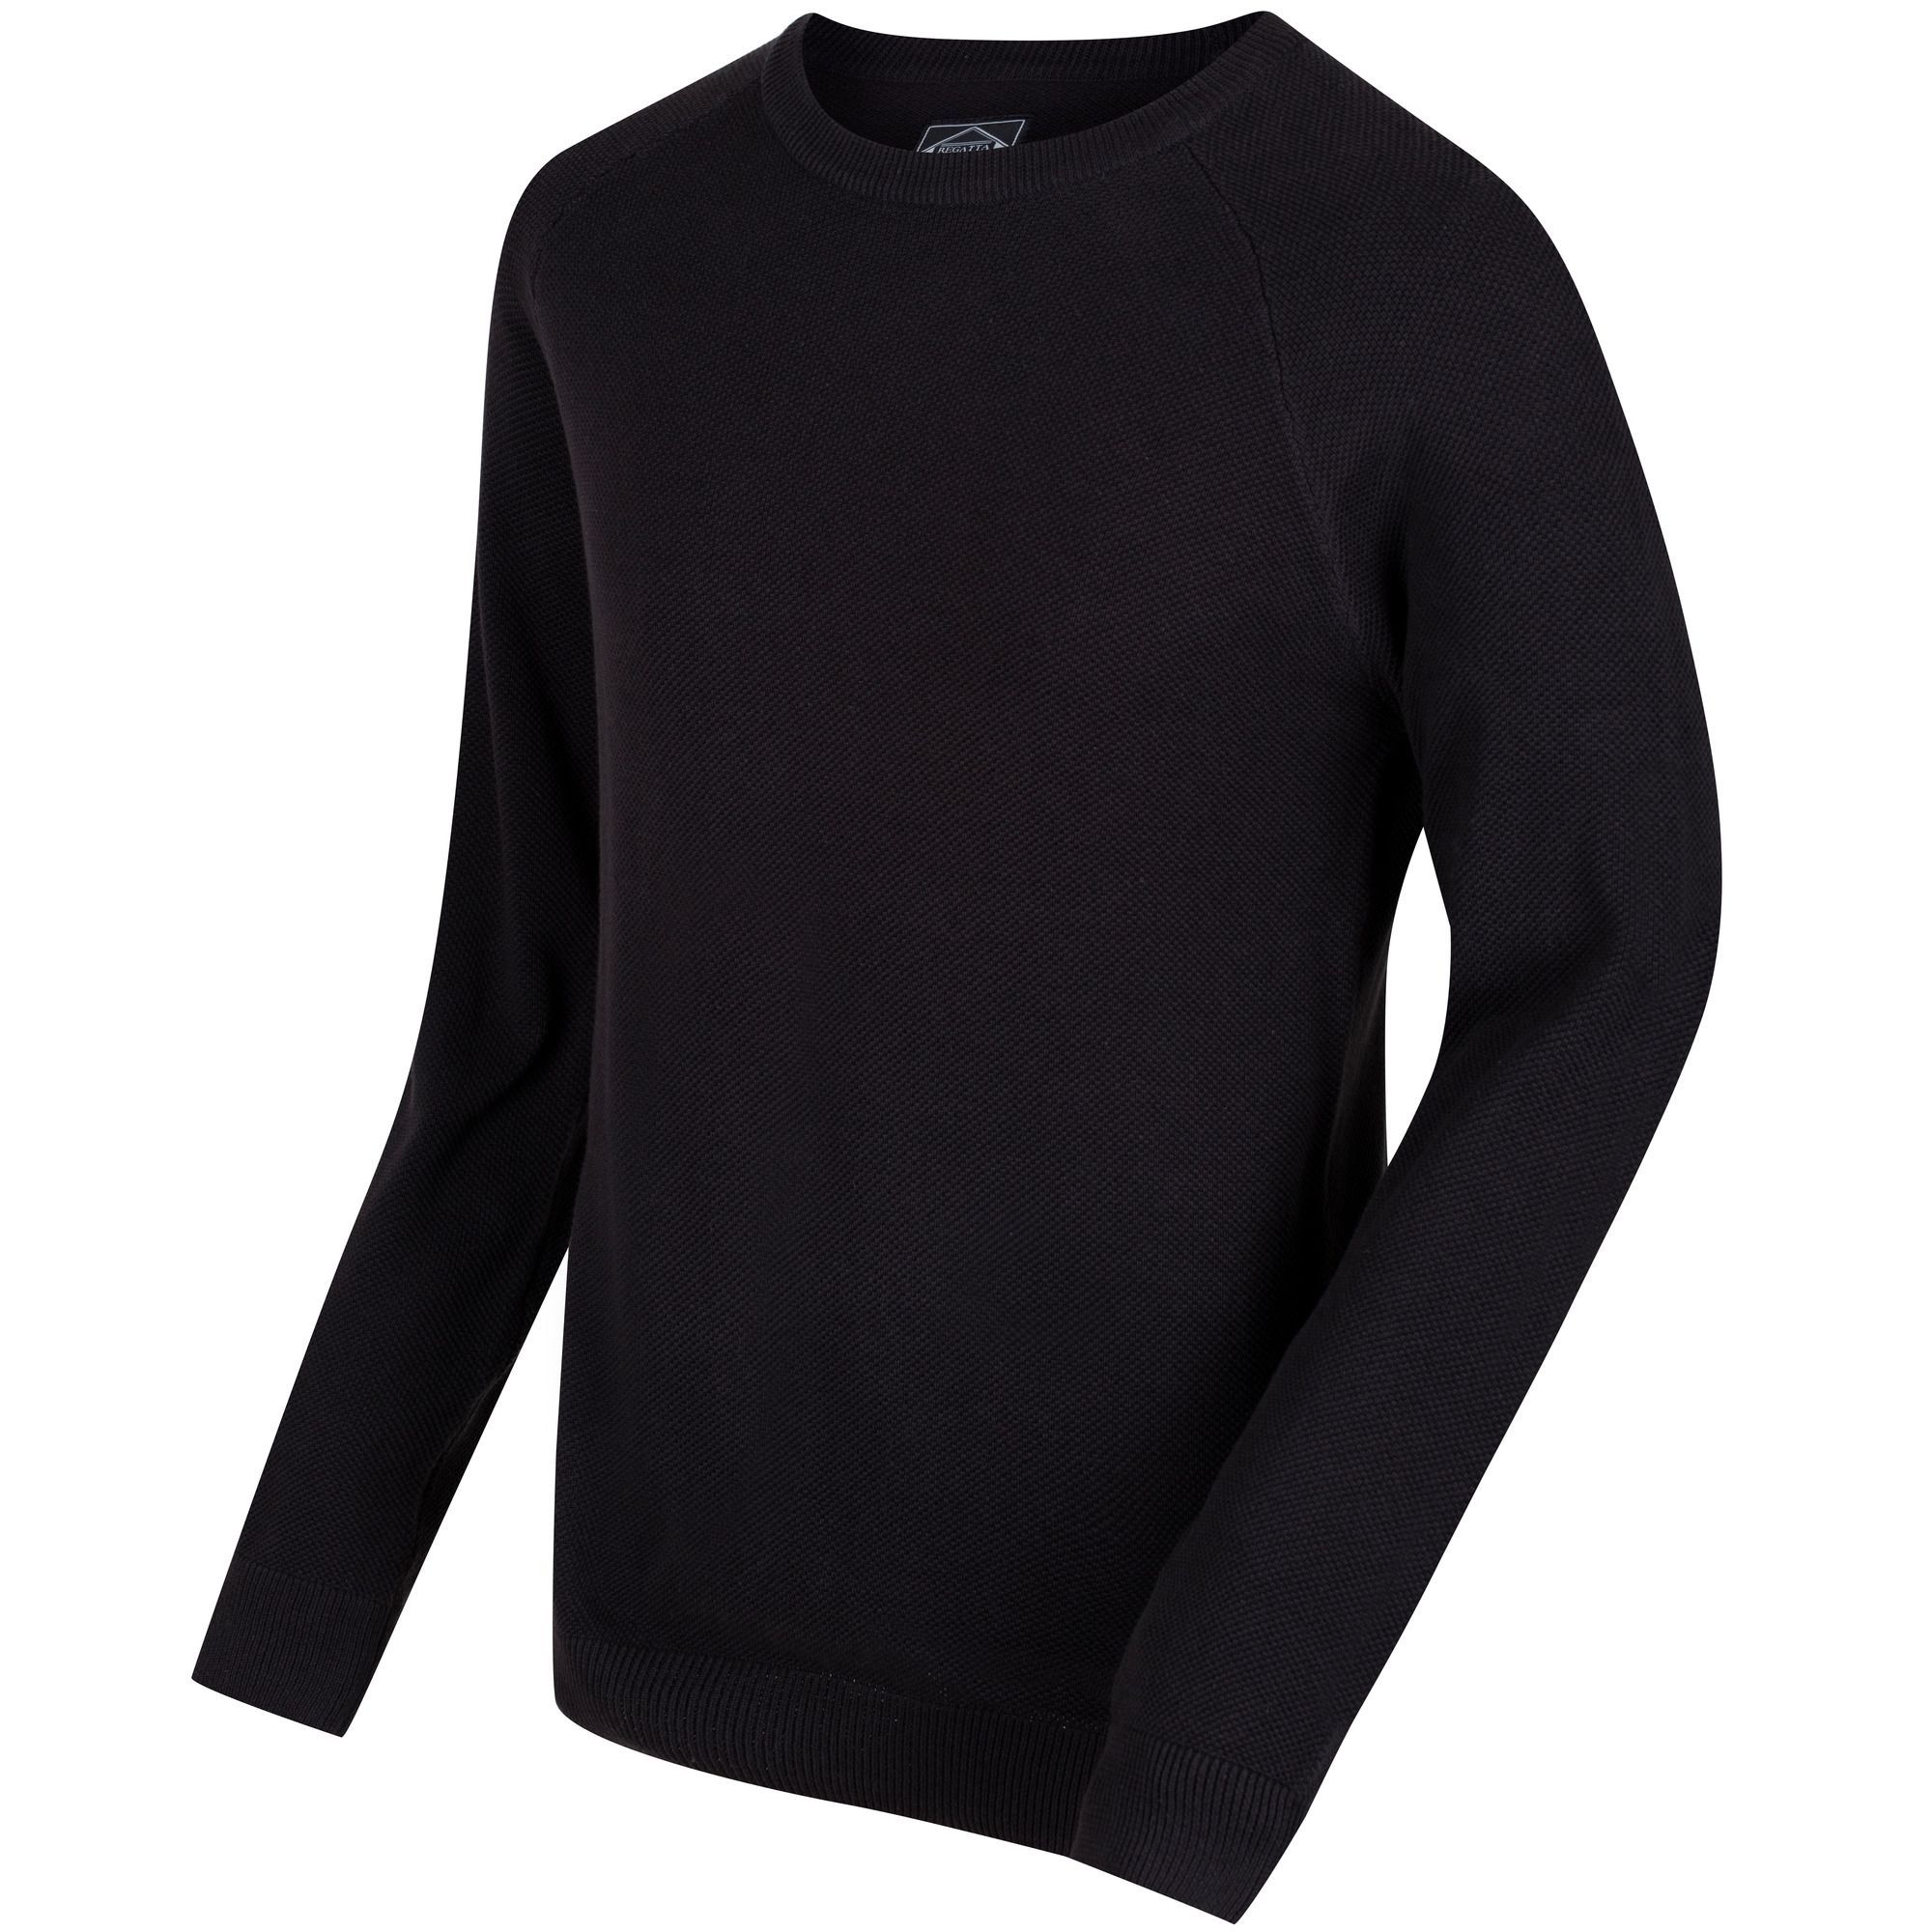 Crew neck sweater knitted from 100% soft touch cotton. 12gg knit.